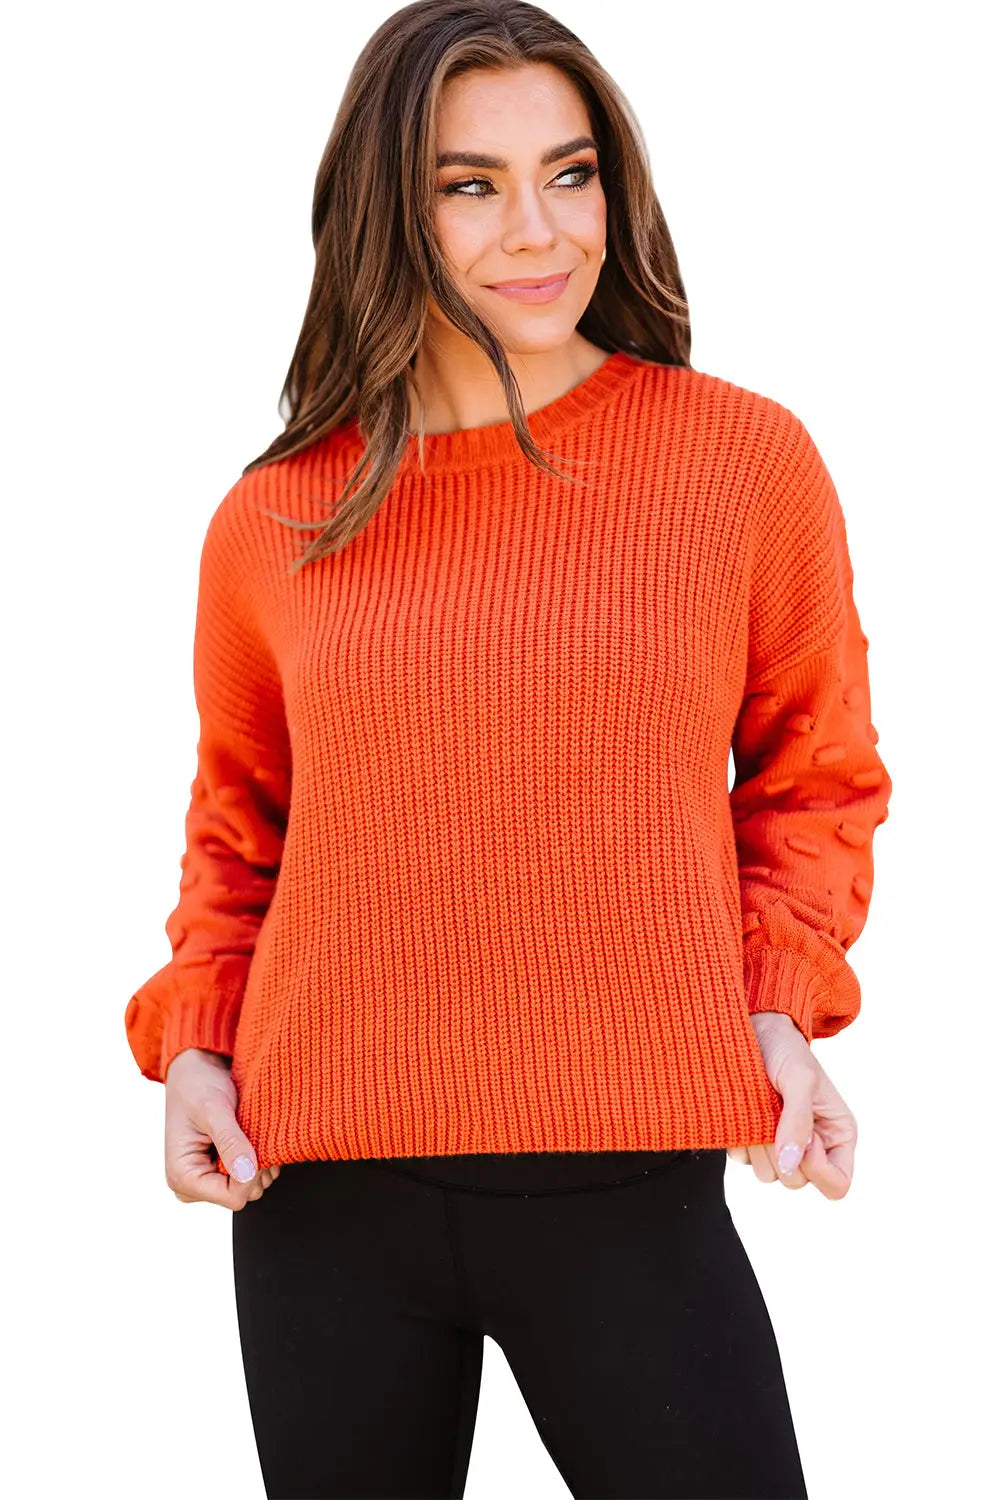 Brown bubble sleeve cropped knit sweater - sweaters & cardigans